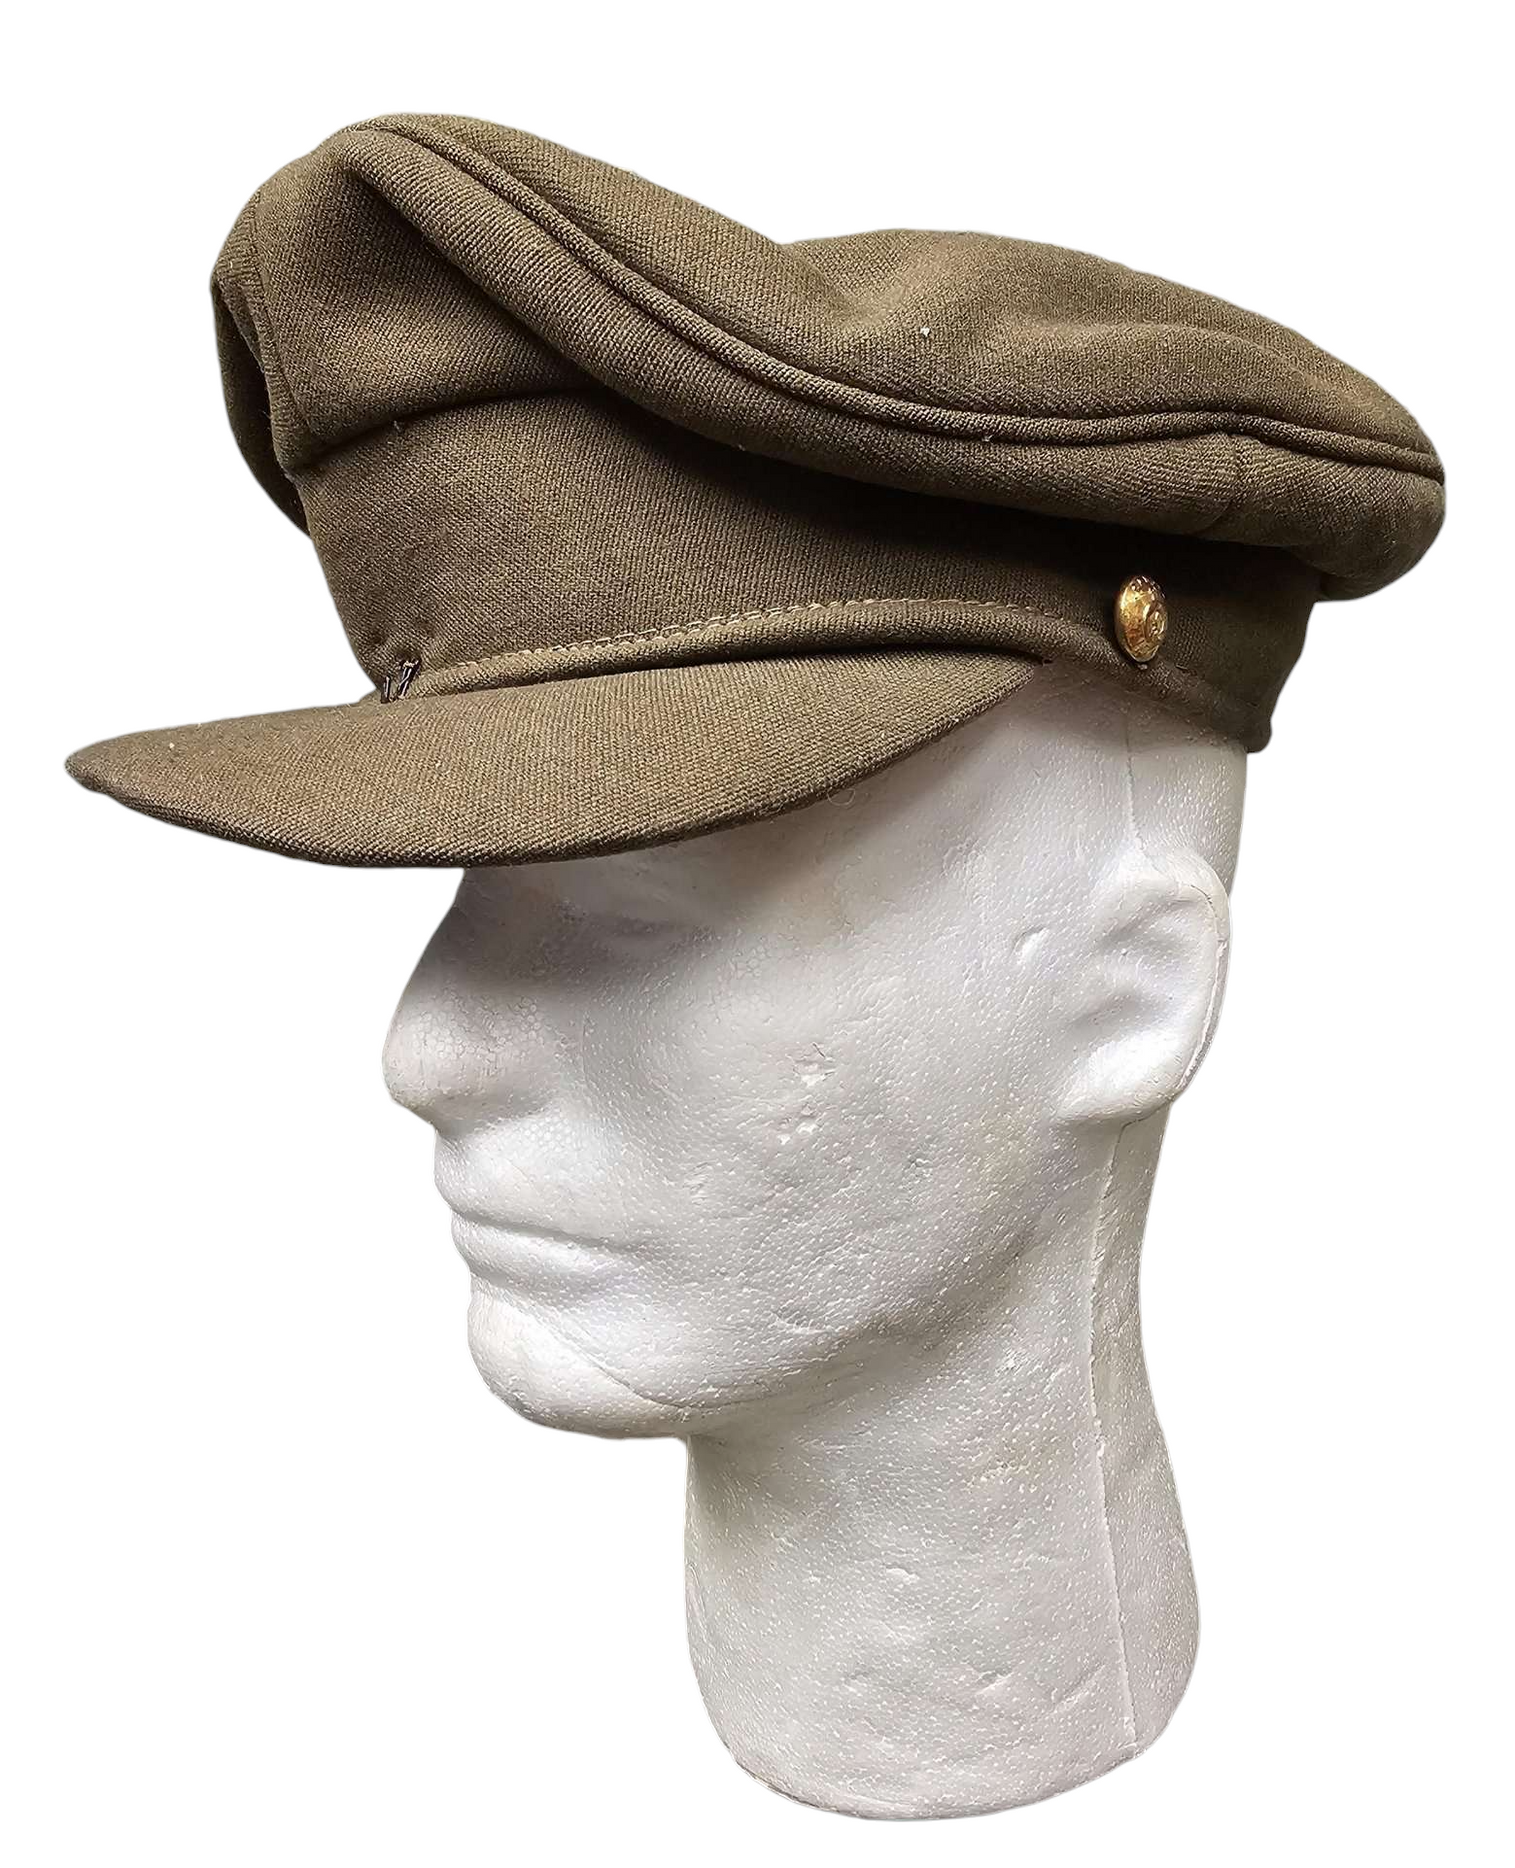 Canadian Armed Forces Post War Officers Dress Cap